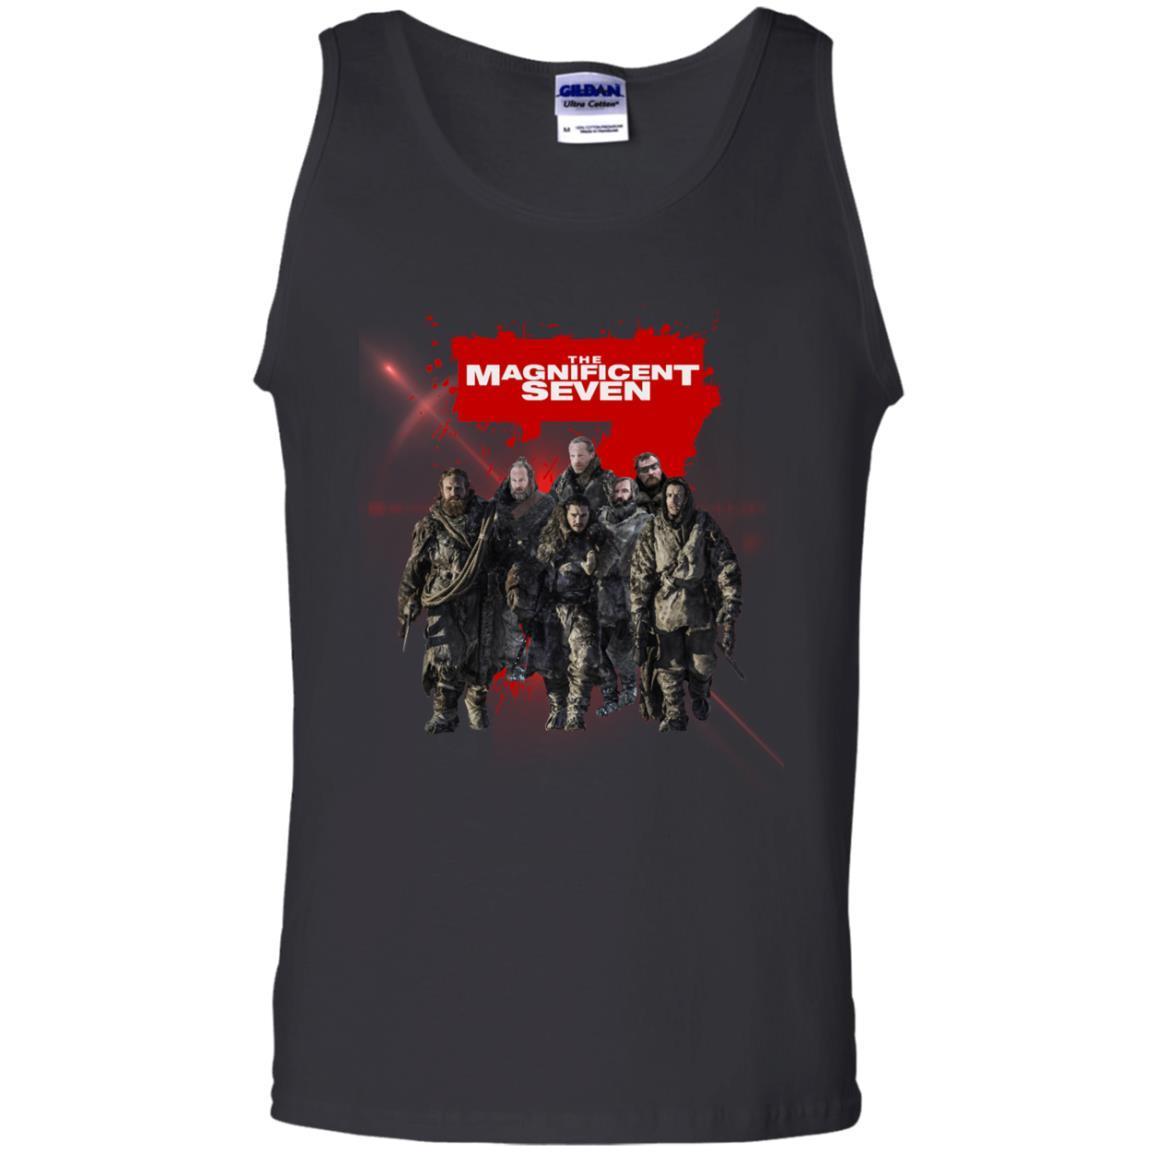 The Magnificent Seven Game Of Thrones Version T-shirt Black S 